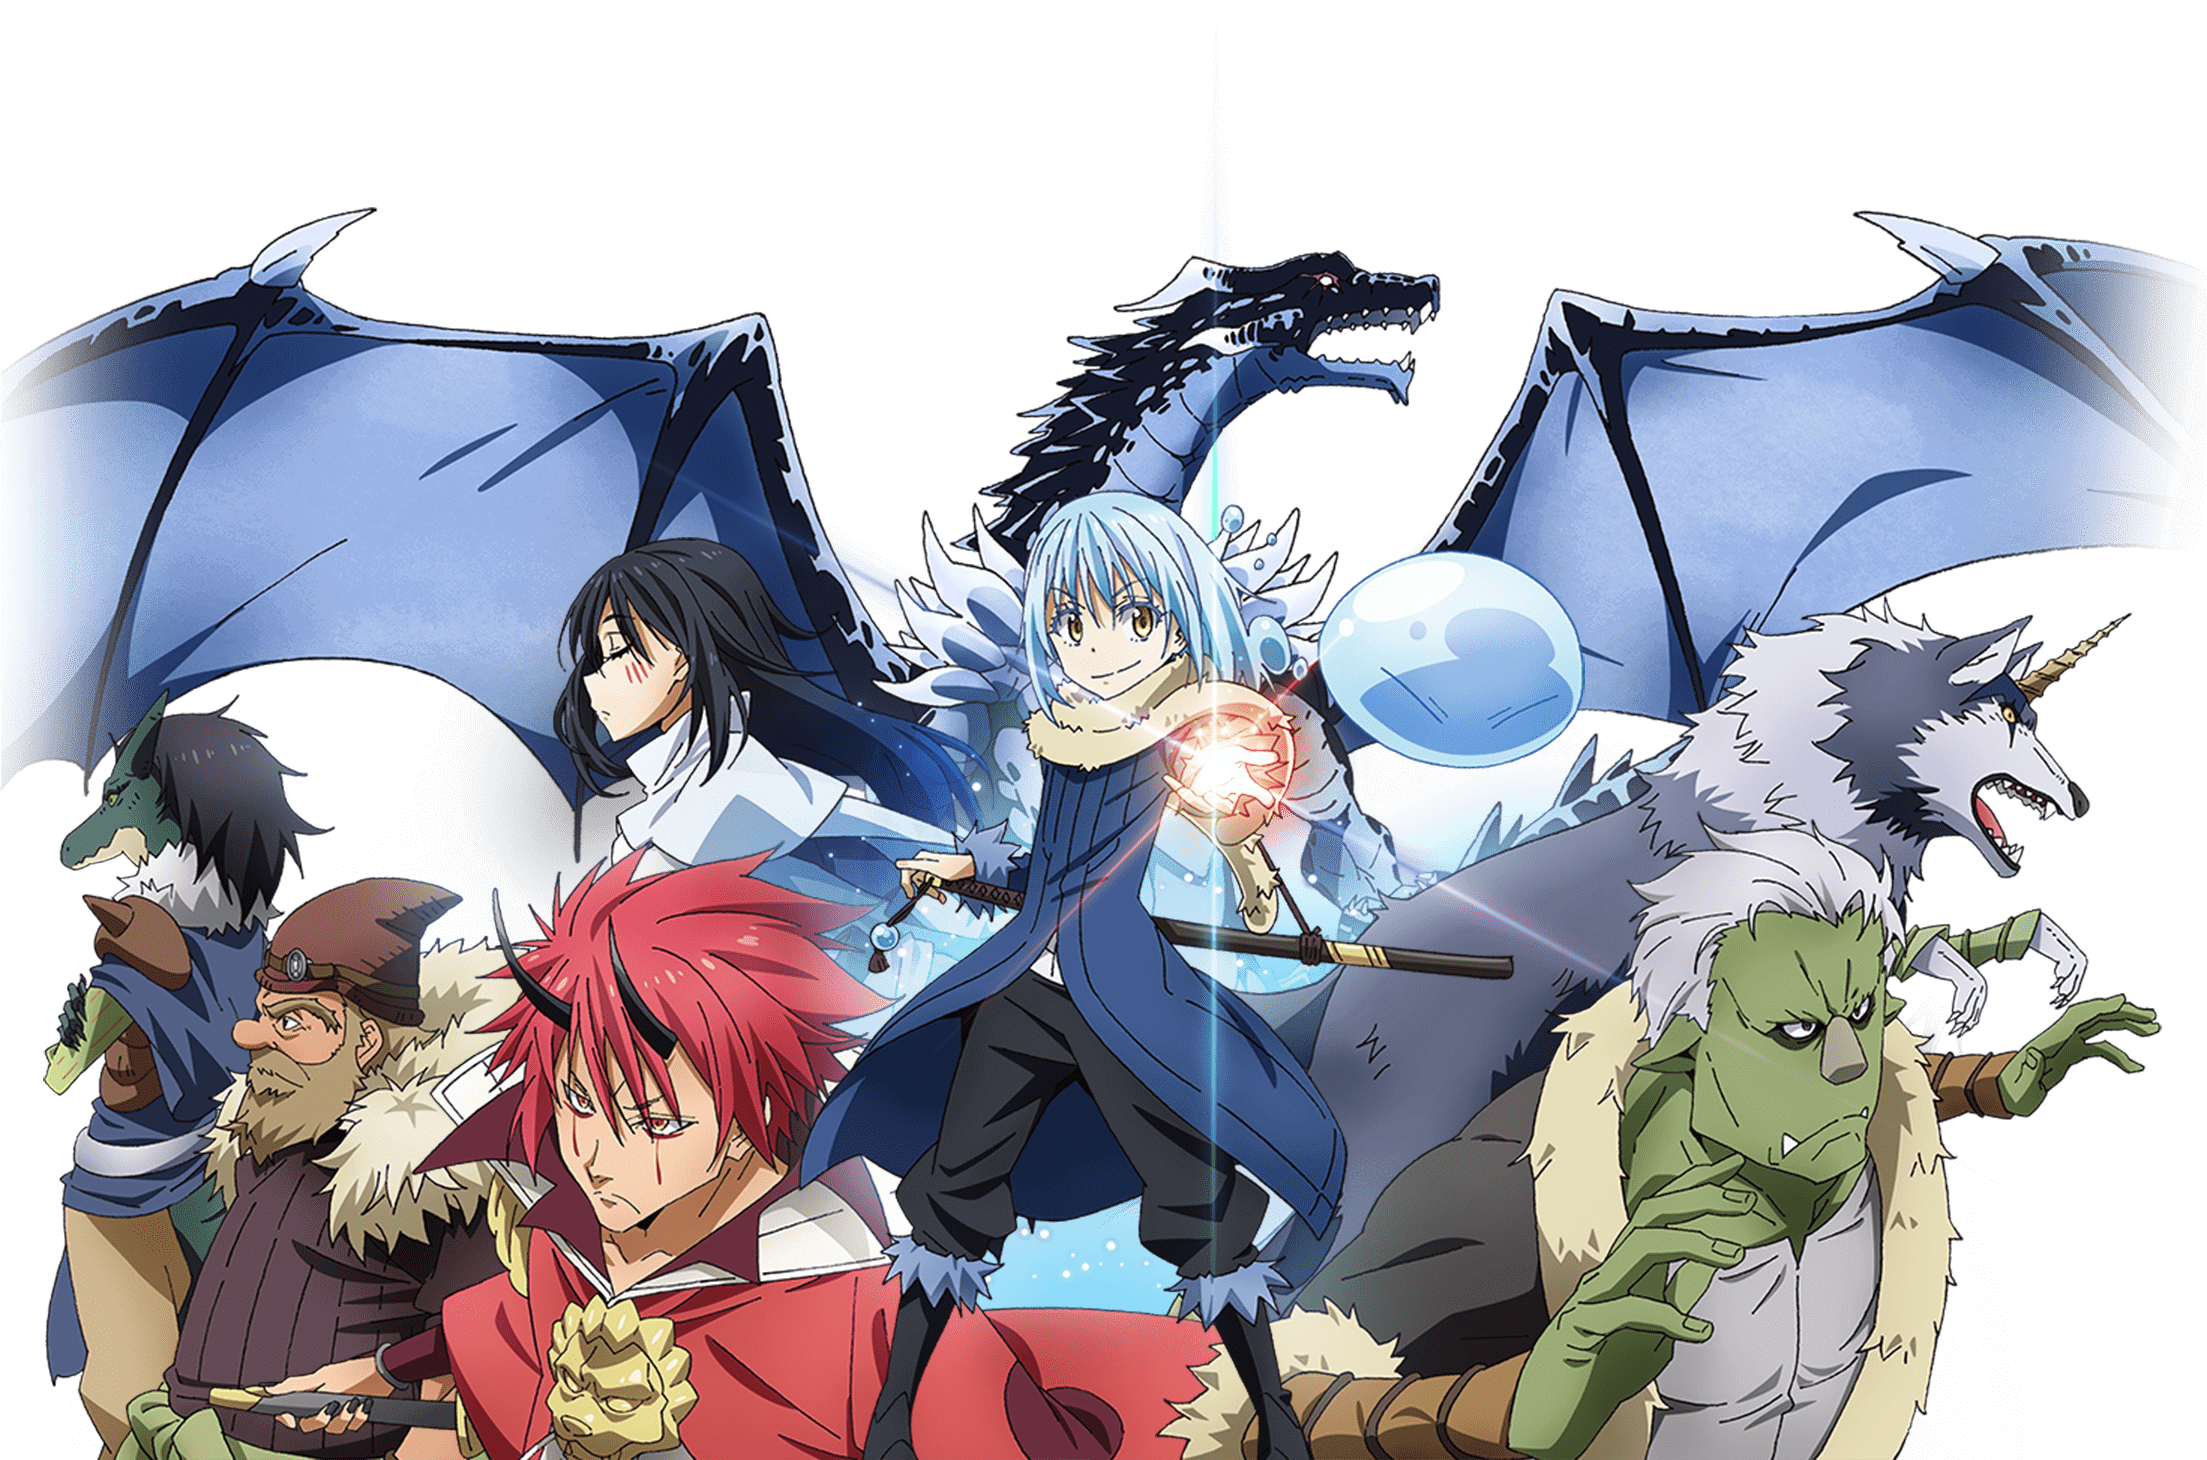 250+ That Time I Got Reincarnated as a Slime HD Wallpapers and Backgrounds